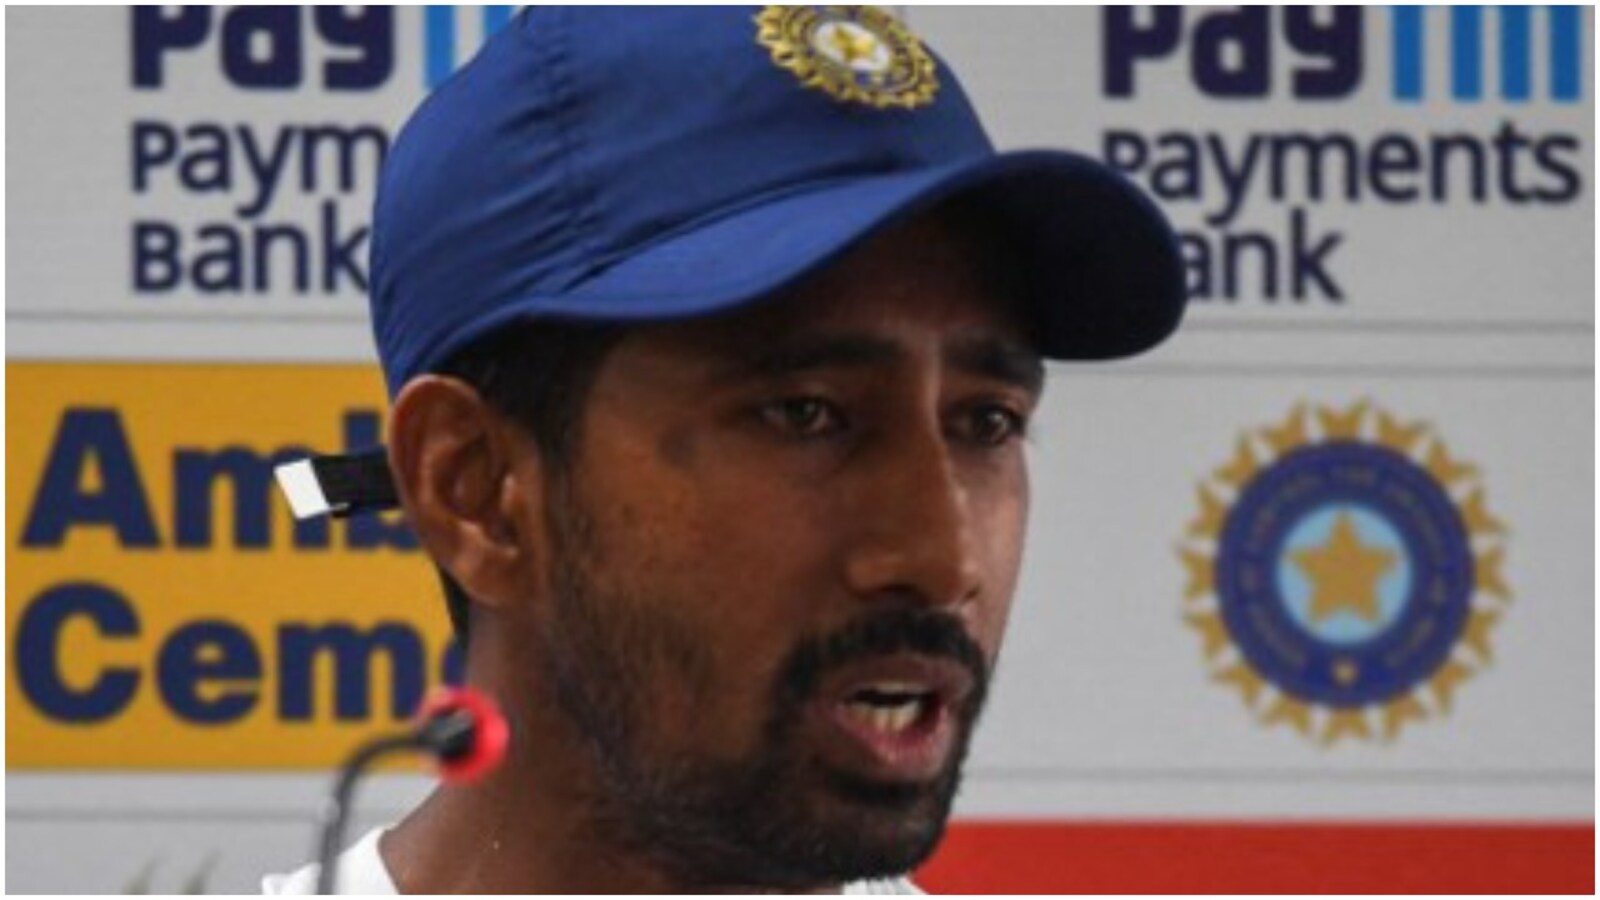 Cricket.com on Twitter: WHAT A KNOCK! Wriddhiman Saha smashes a